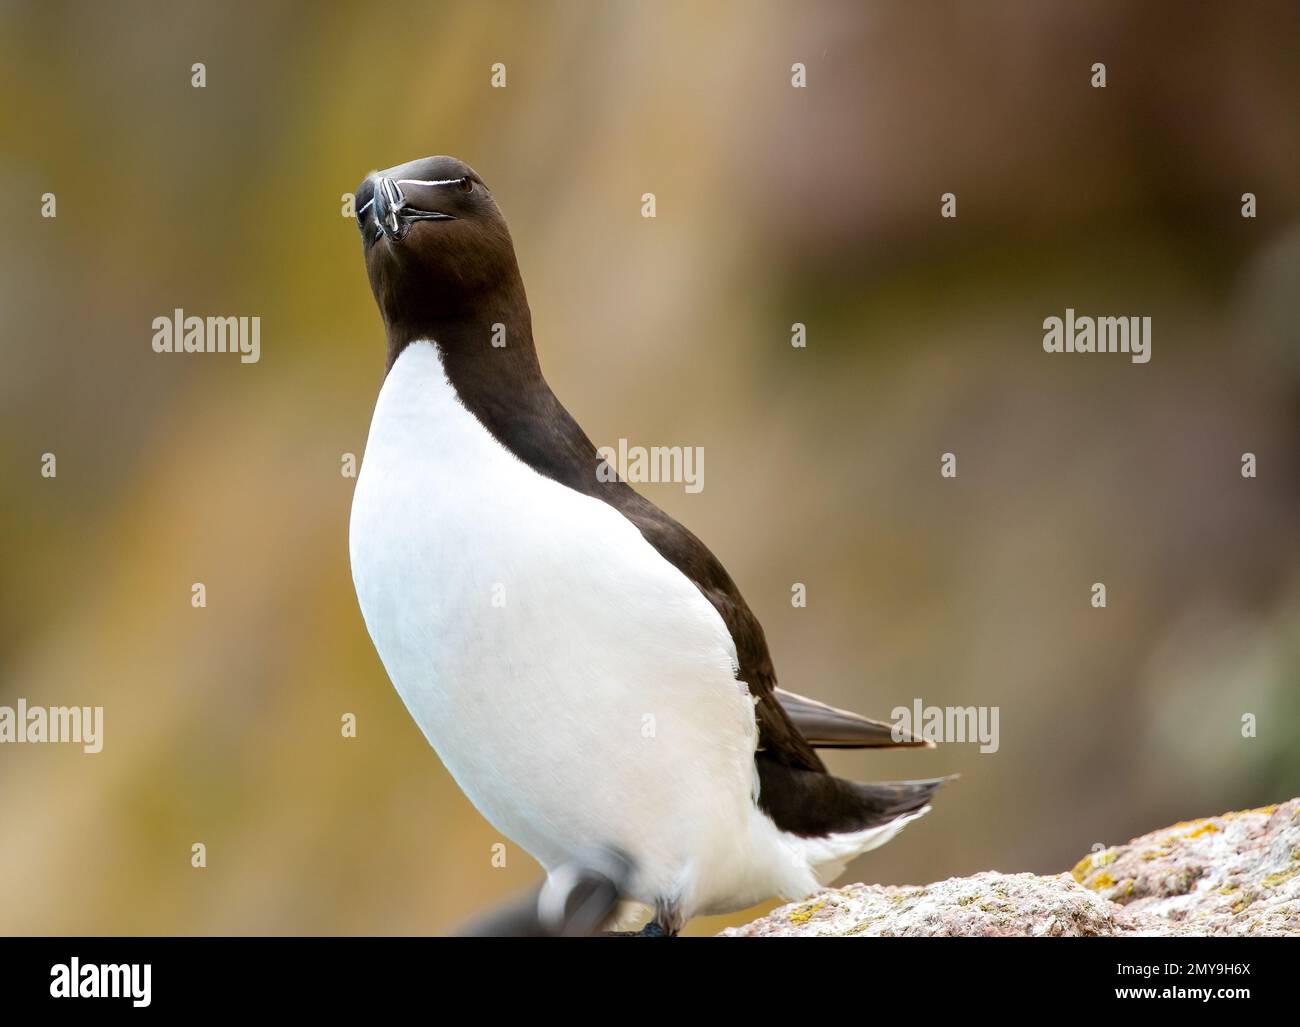 A shallow focus shot of a razor-billed auk bird standing on a rock on a sunny day with blur background Stock Photo